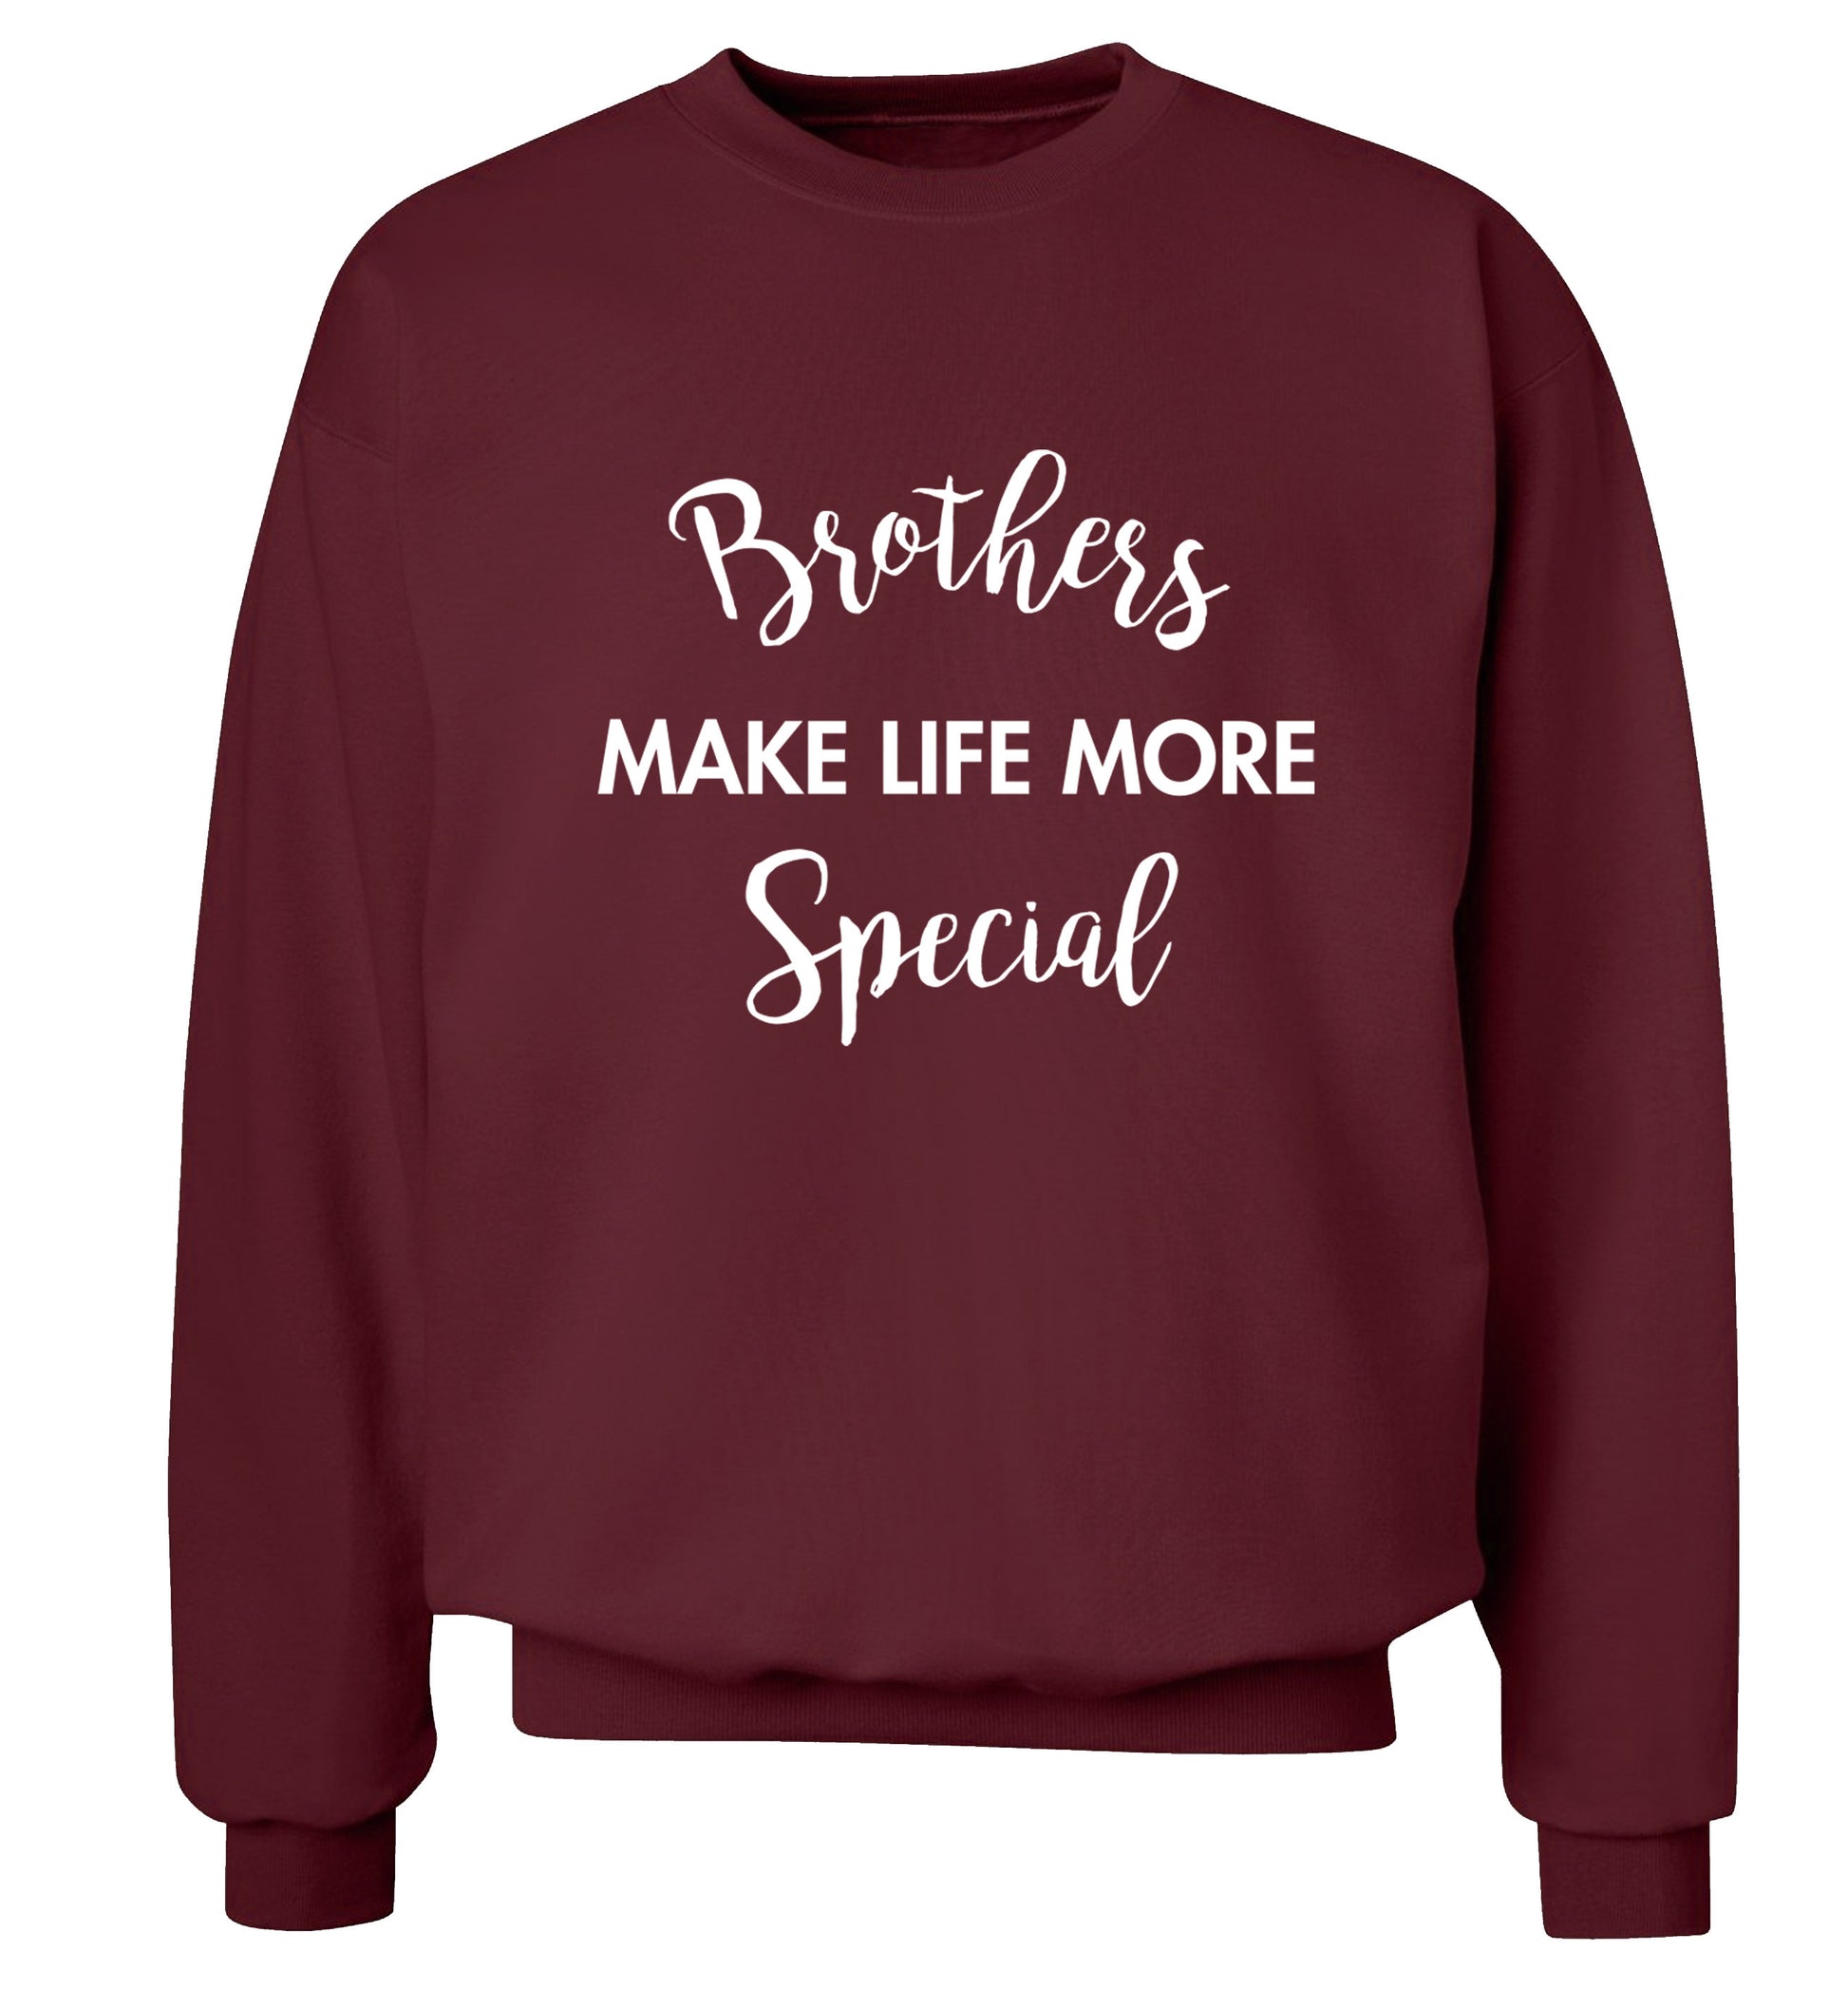 Brothers make life more special Adult's unisex maroon Sweater 2XL